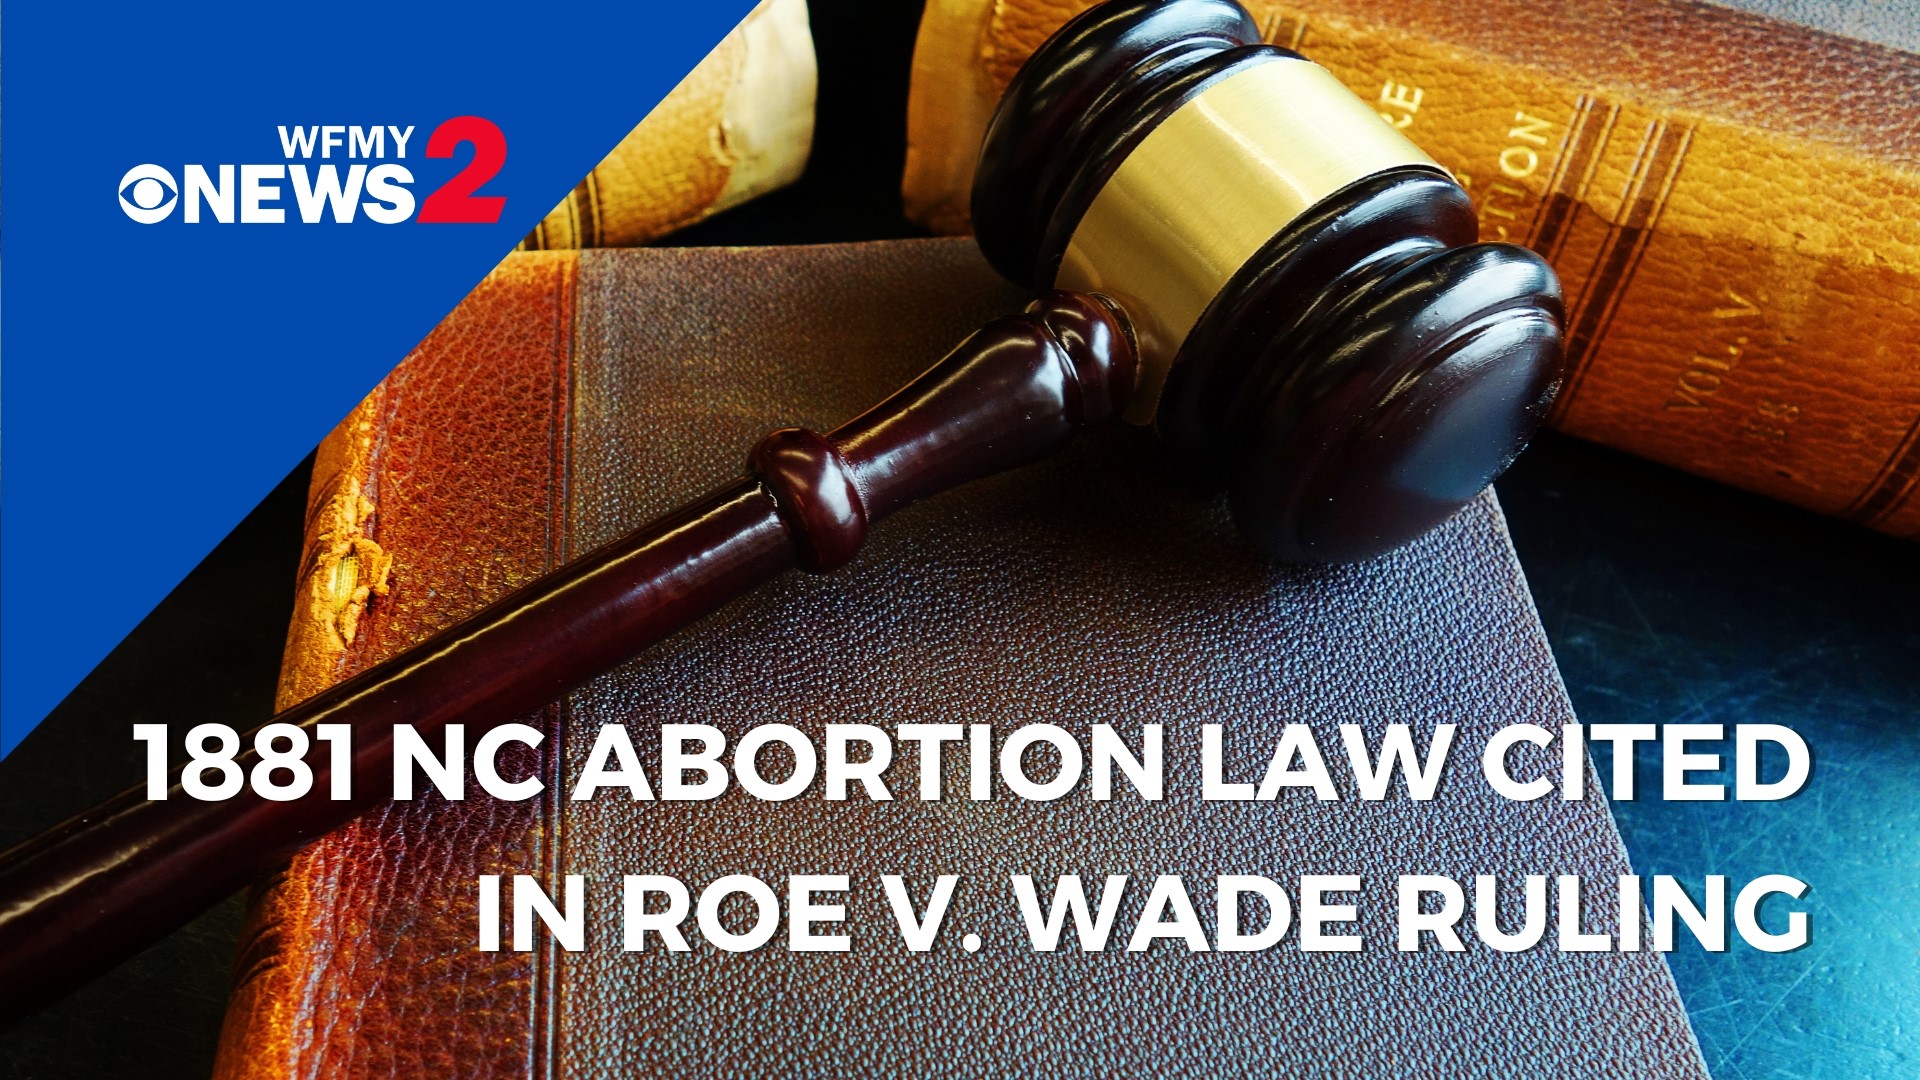 Here's what was in the majority opinion in overturning Roe v. Wade.